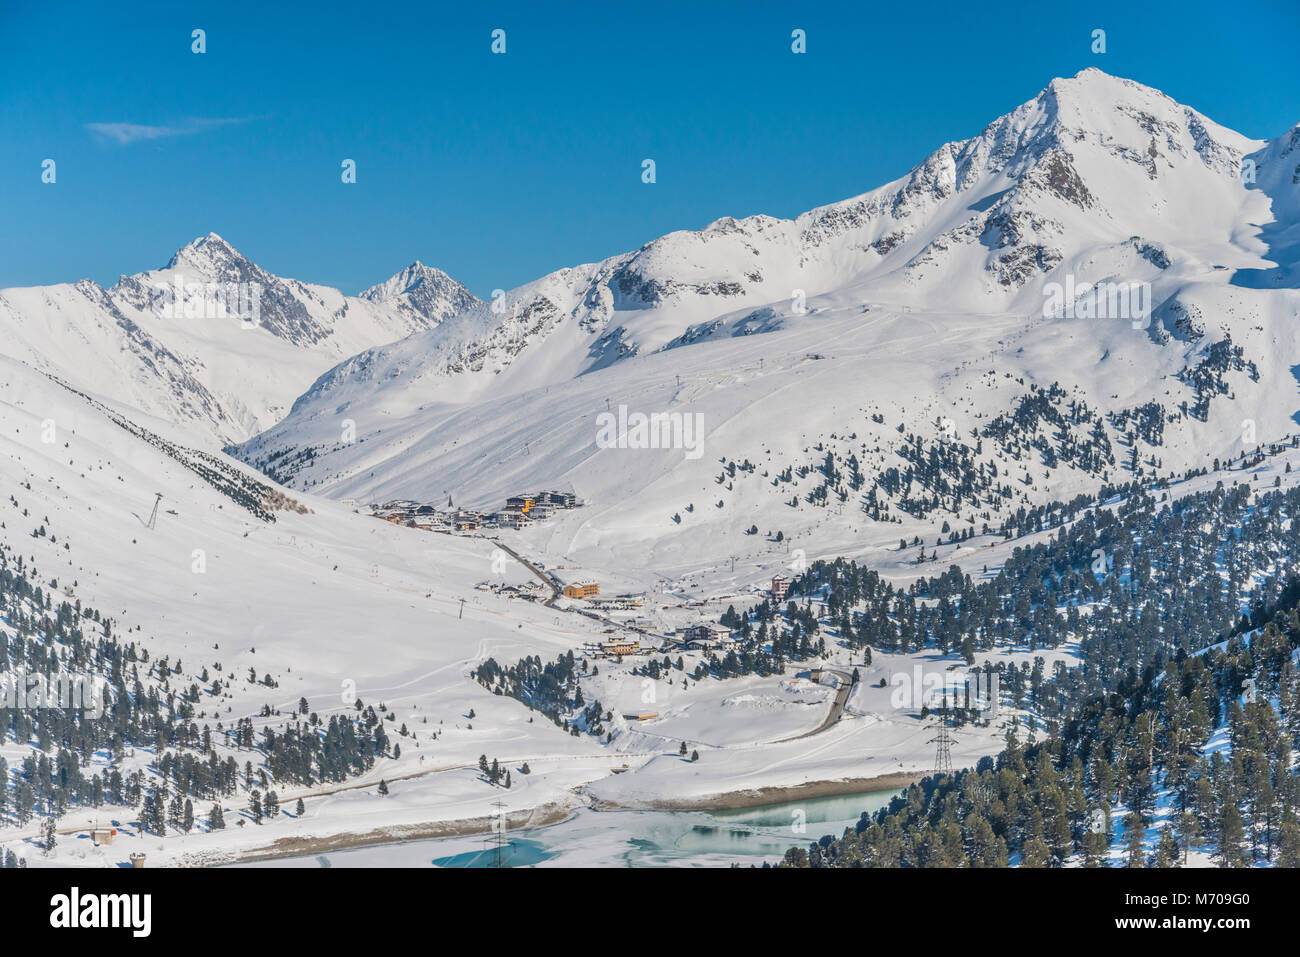 Winter snow scenes in the mountains of the Sellrain Alps in the Austrian Tirol, looking towards the ski-resort area of Kuehtai Stock Photo